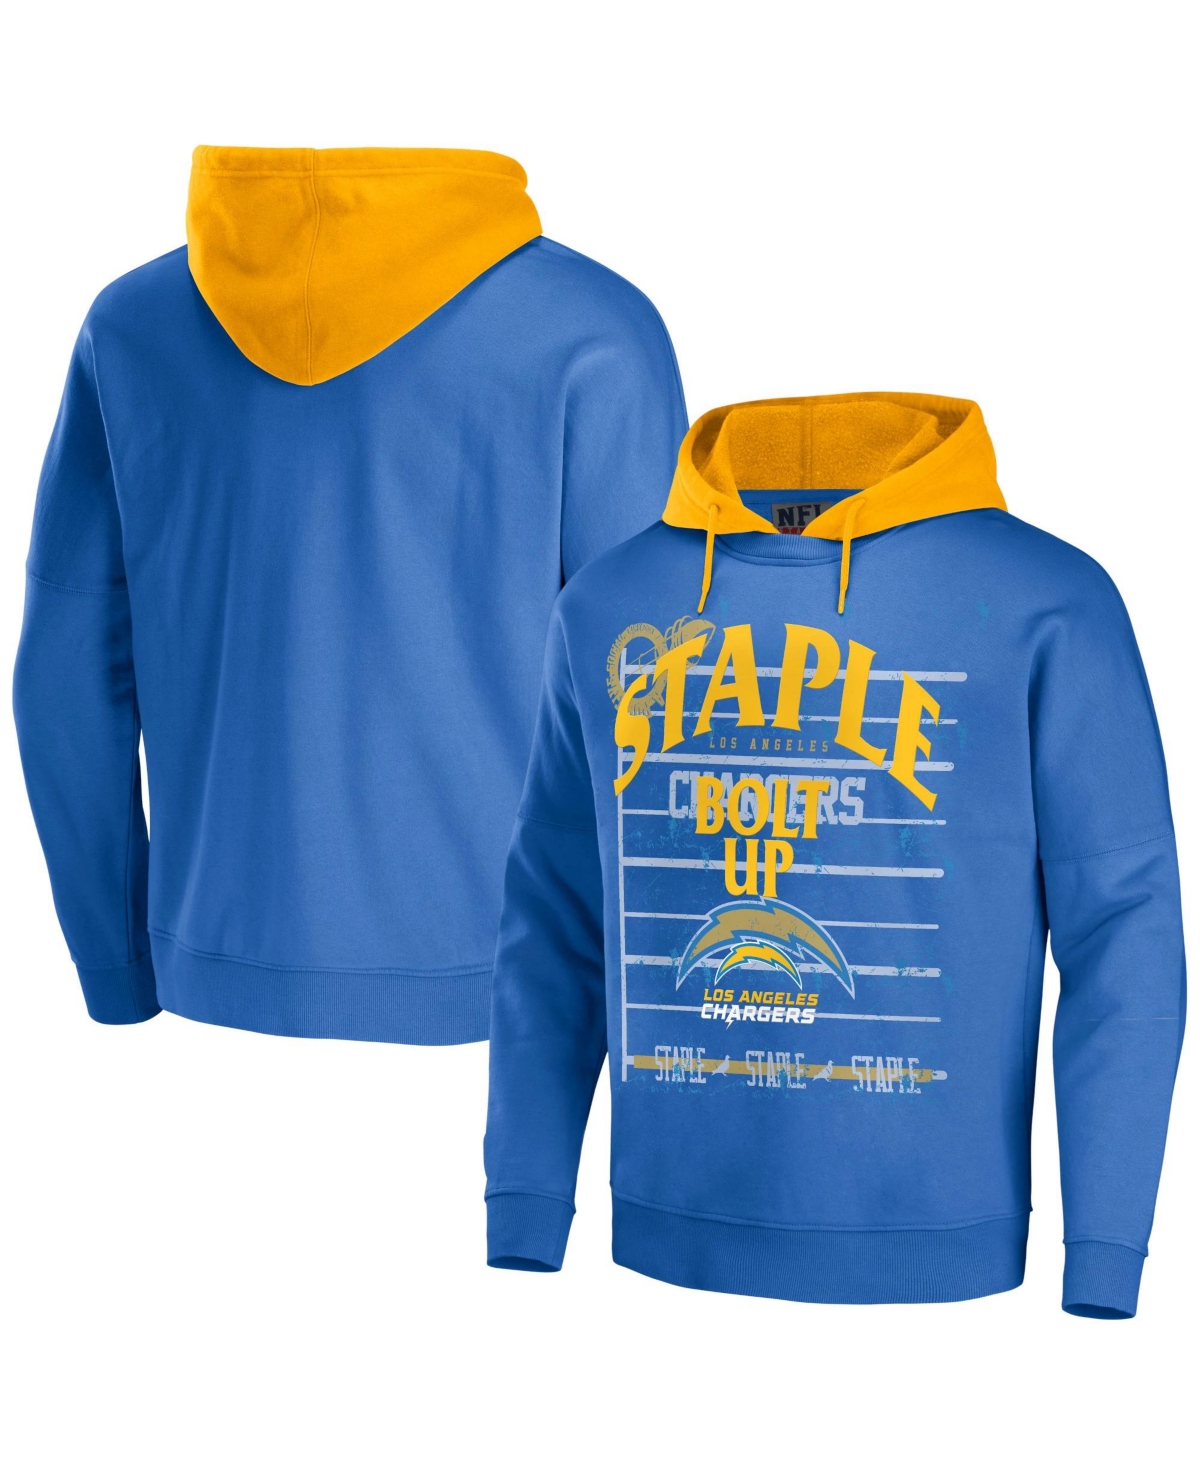 Men's Nfl X Staple Blue Los Angeles Chargers Oversized Gridiron Vintage-Like Wash Pullover Hoodie - Blue